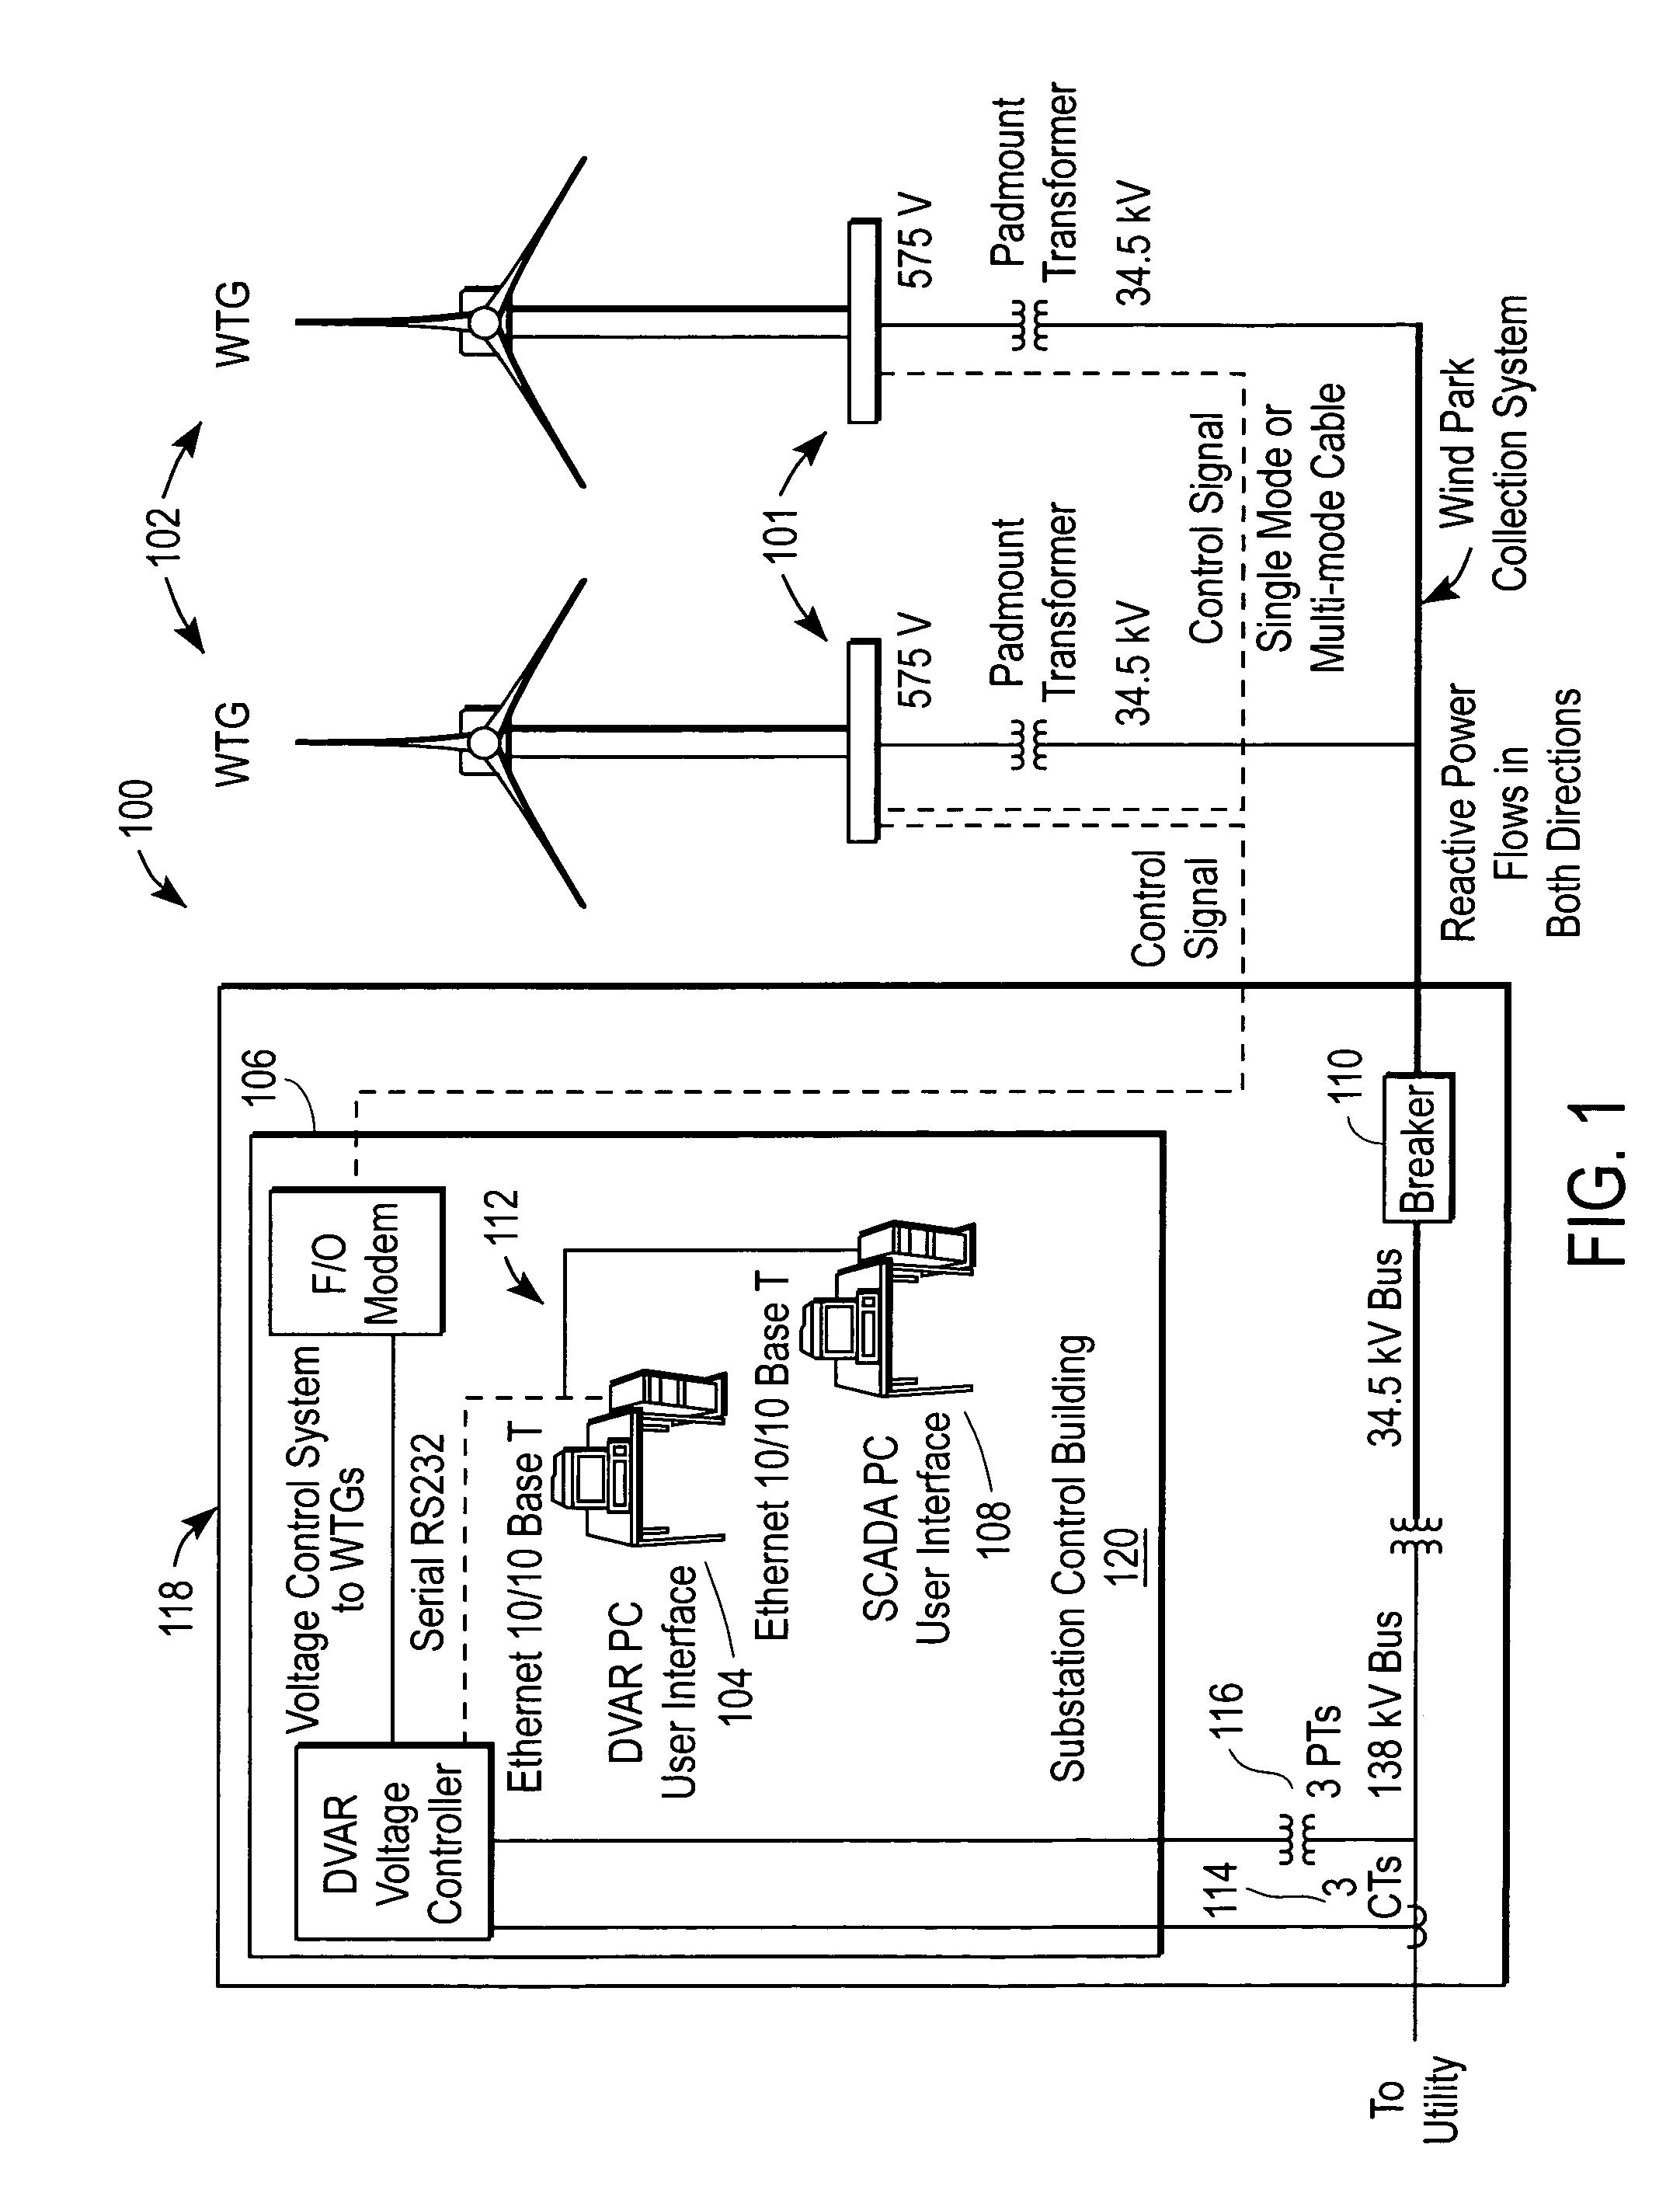 Various methods and apparatuses to provide remote access to a wind turbine generator system